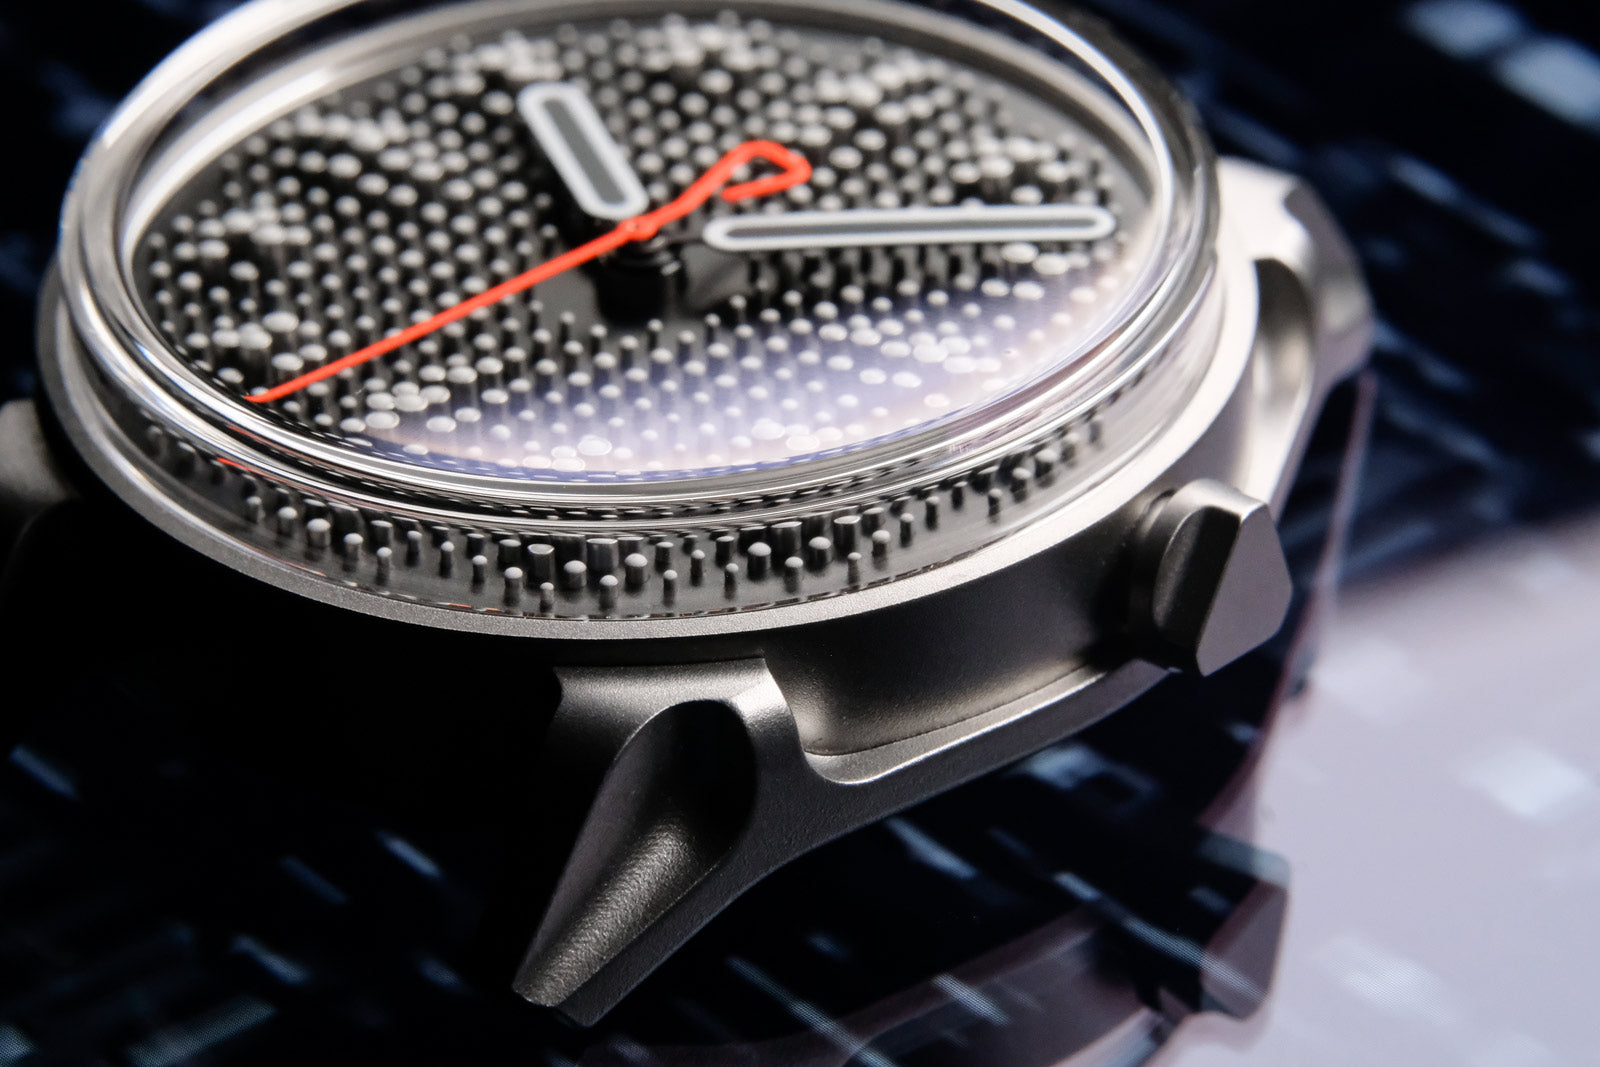 Kollokium: A revolutionary force in watchmaking with design at its core